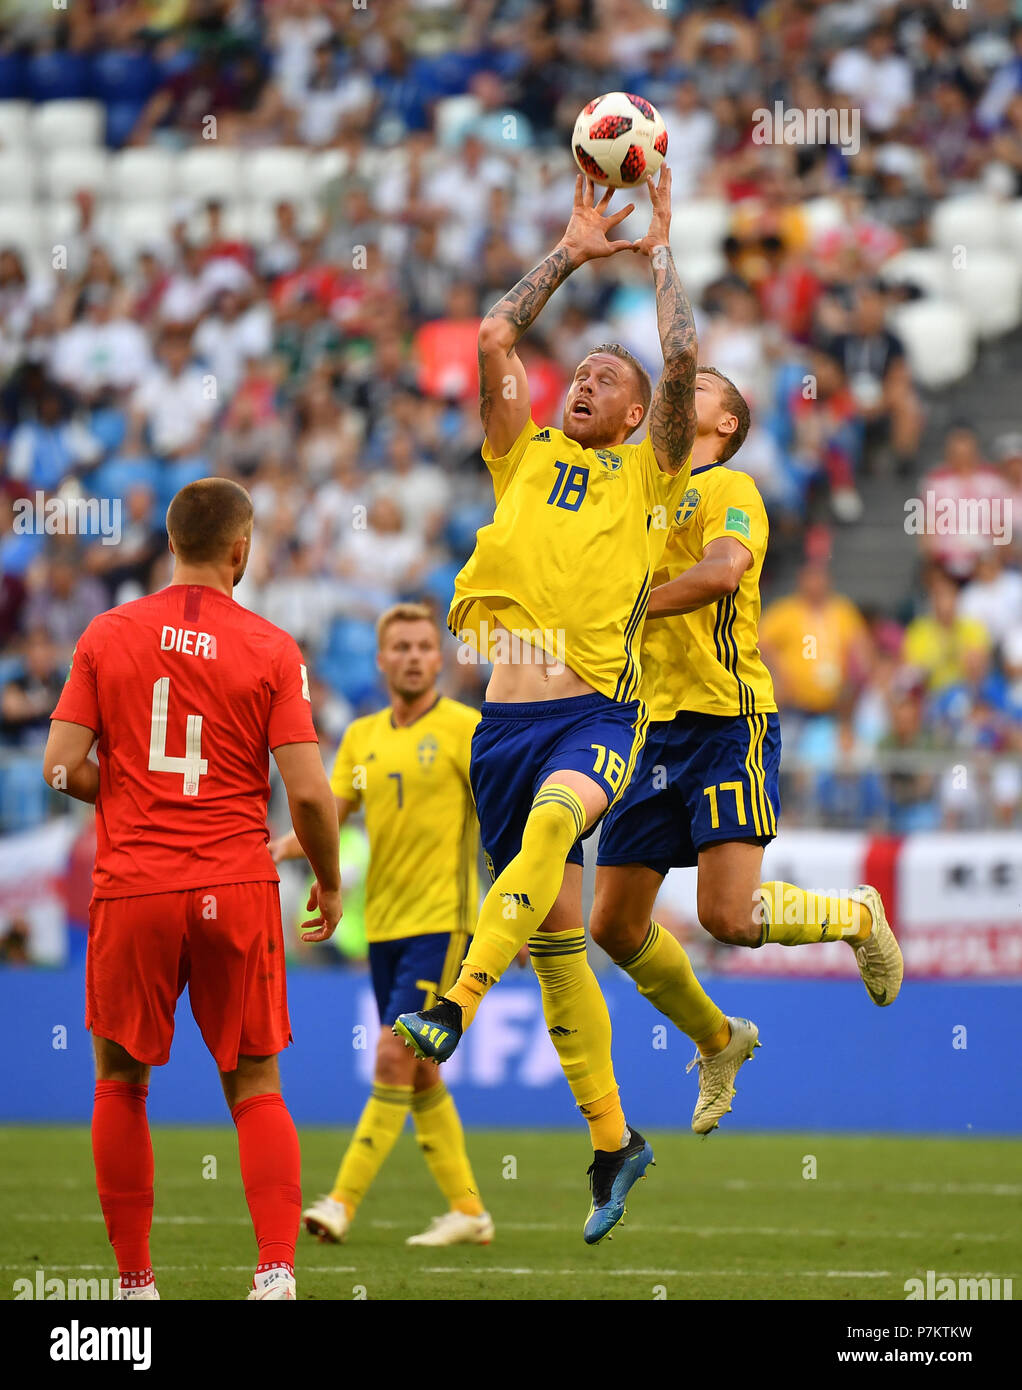 Samara, Russia. 7th July, 2018. Pontus Jansson (L top) of Sweden catches the ball at the end of the 2018 FIFA World Cup quarter-final match between Sweden and England in Samara, Russia, July 7, 2018. England won 2-0 and advanced to the semi-finals. Credit: Li Ga/Xinhua/Alamy Live News Stock Photo